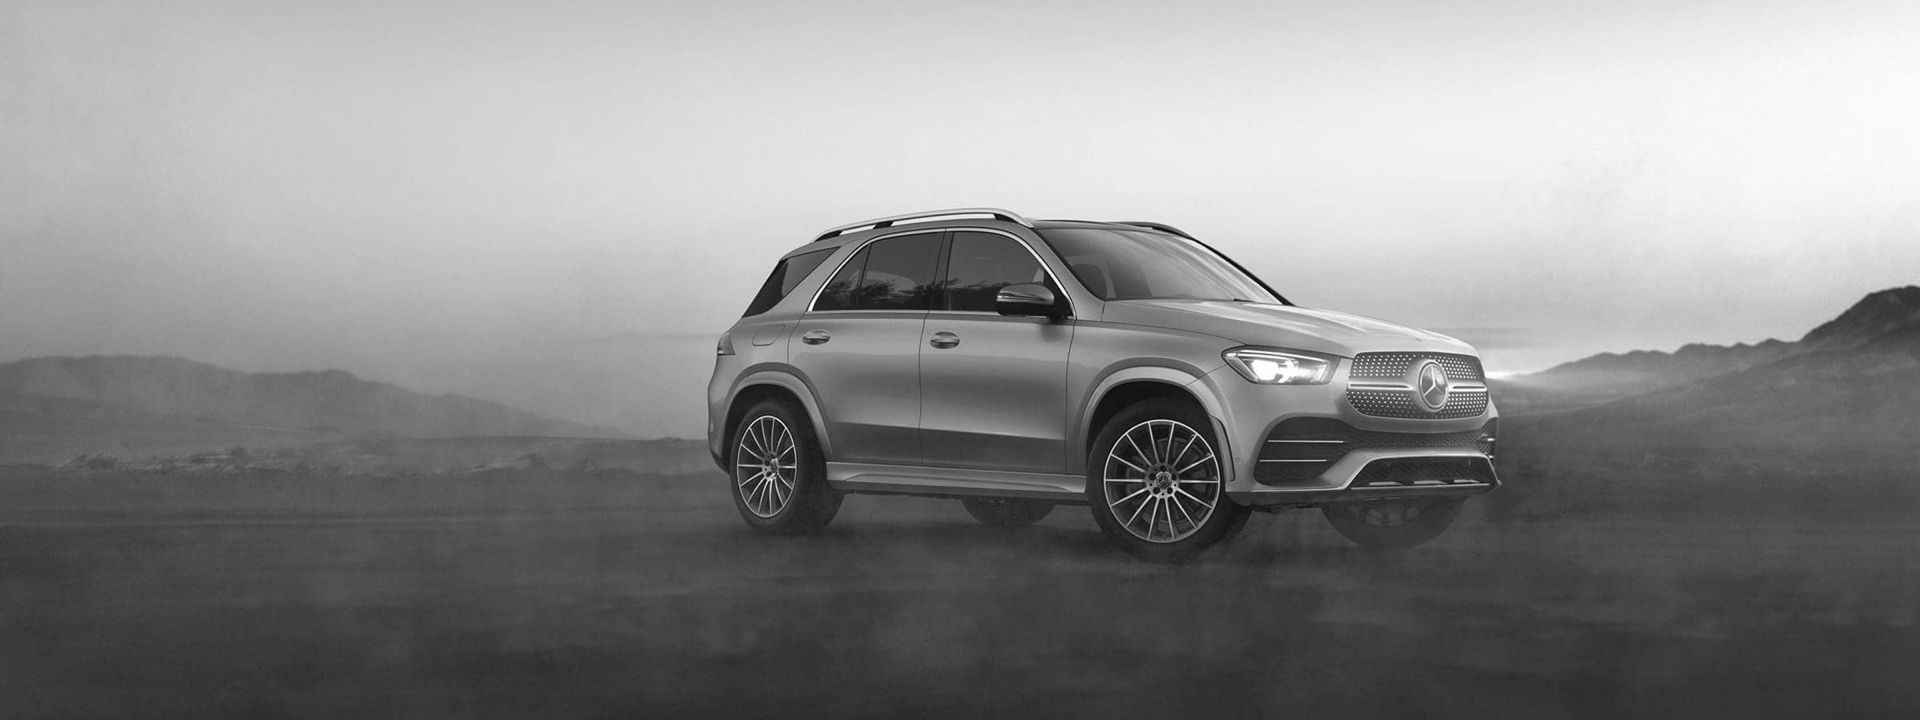 Grayscale 2020 Mercedes GLE parked in foggy plains